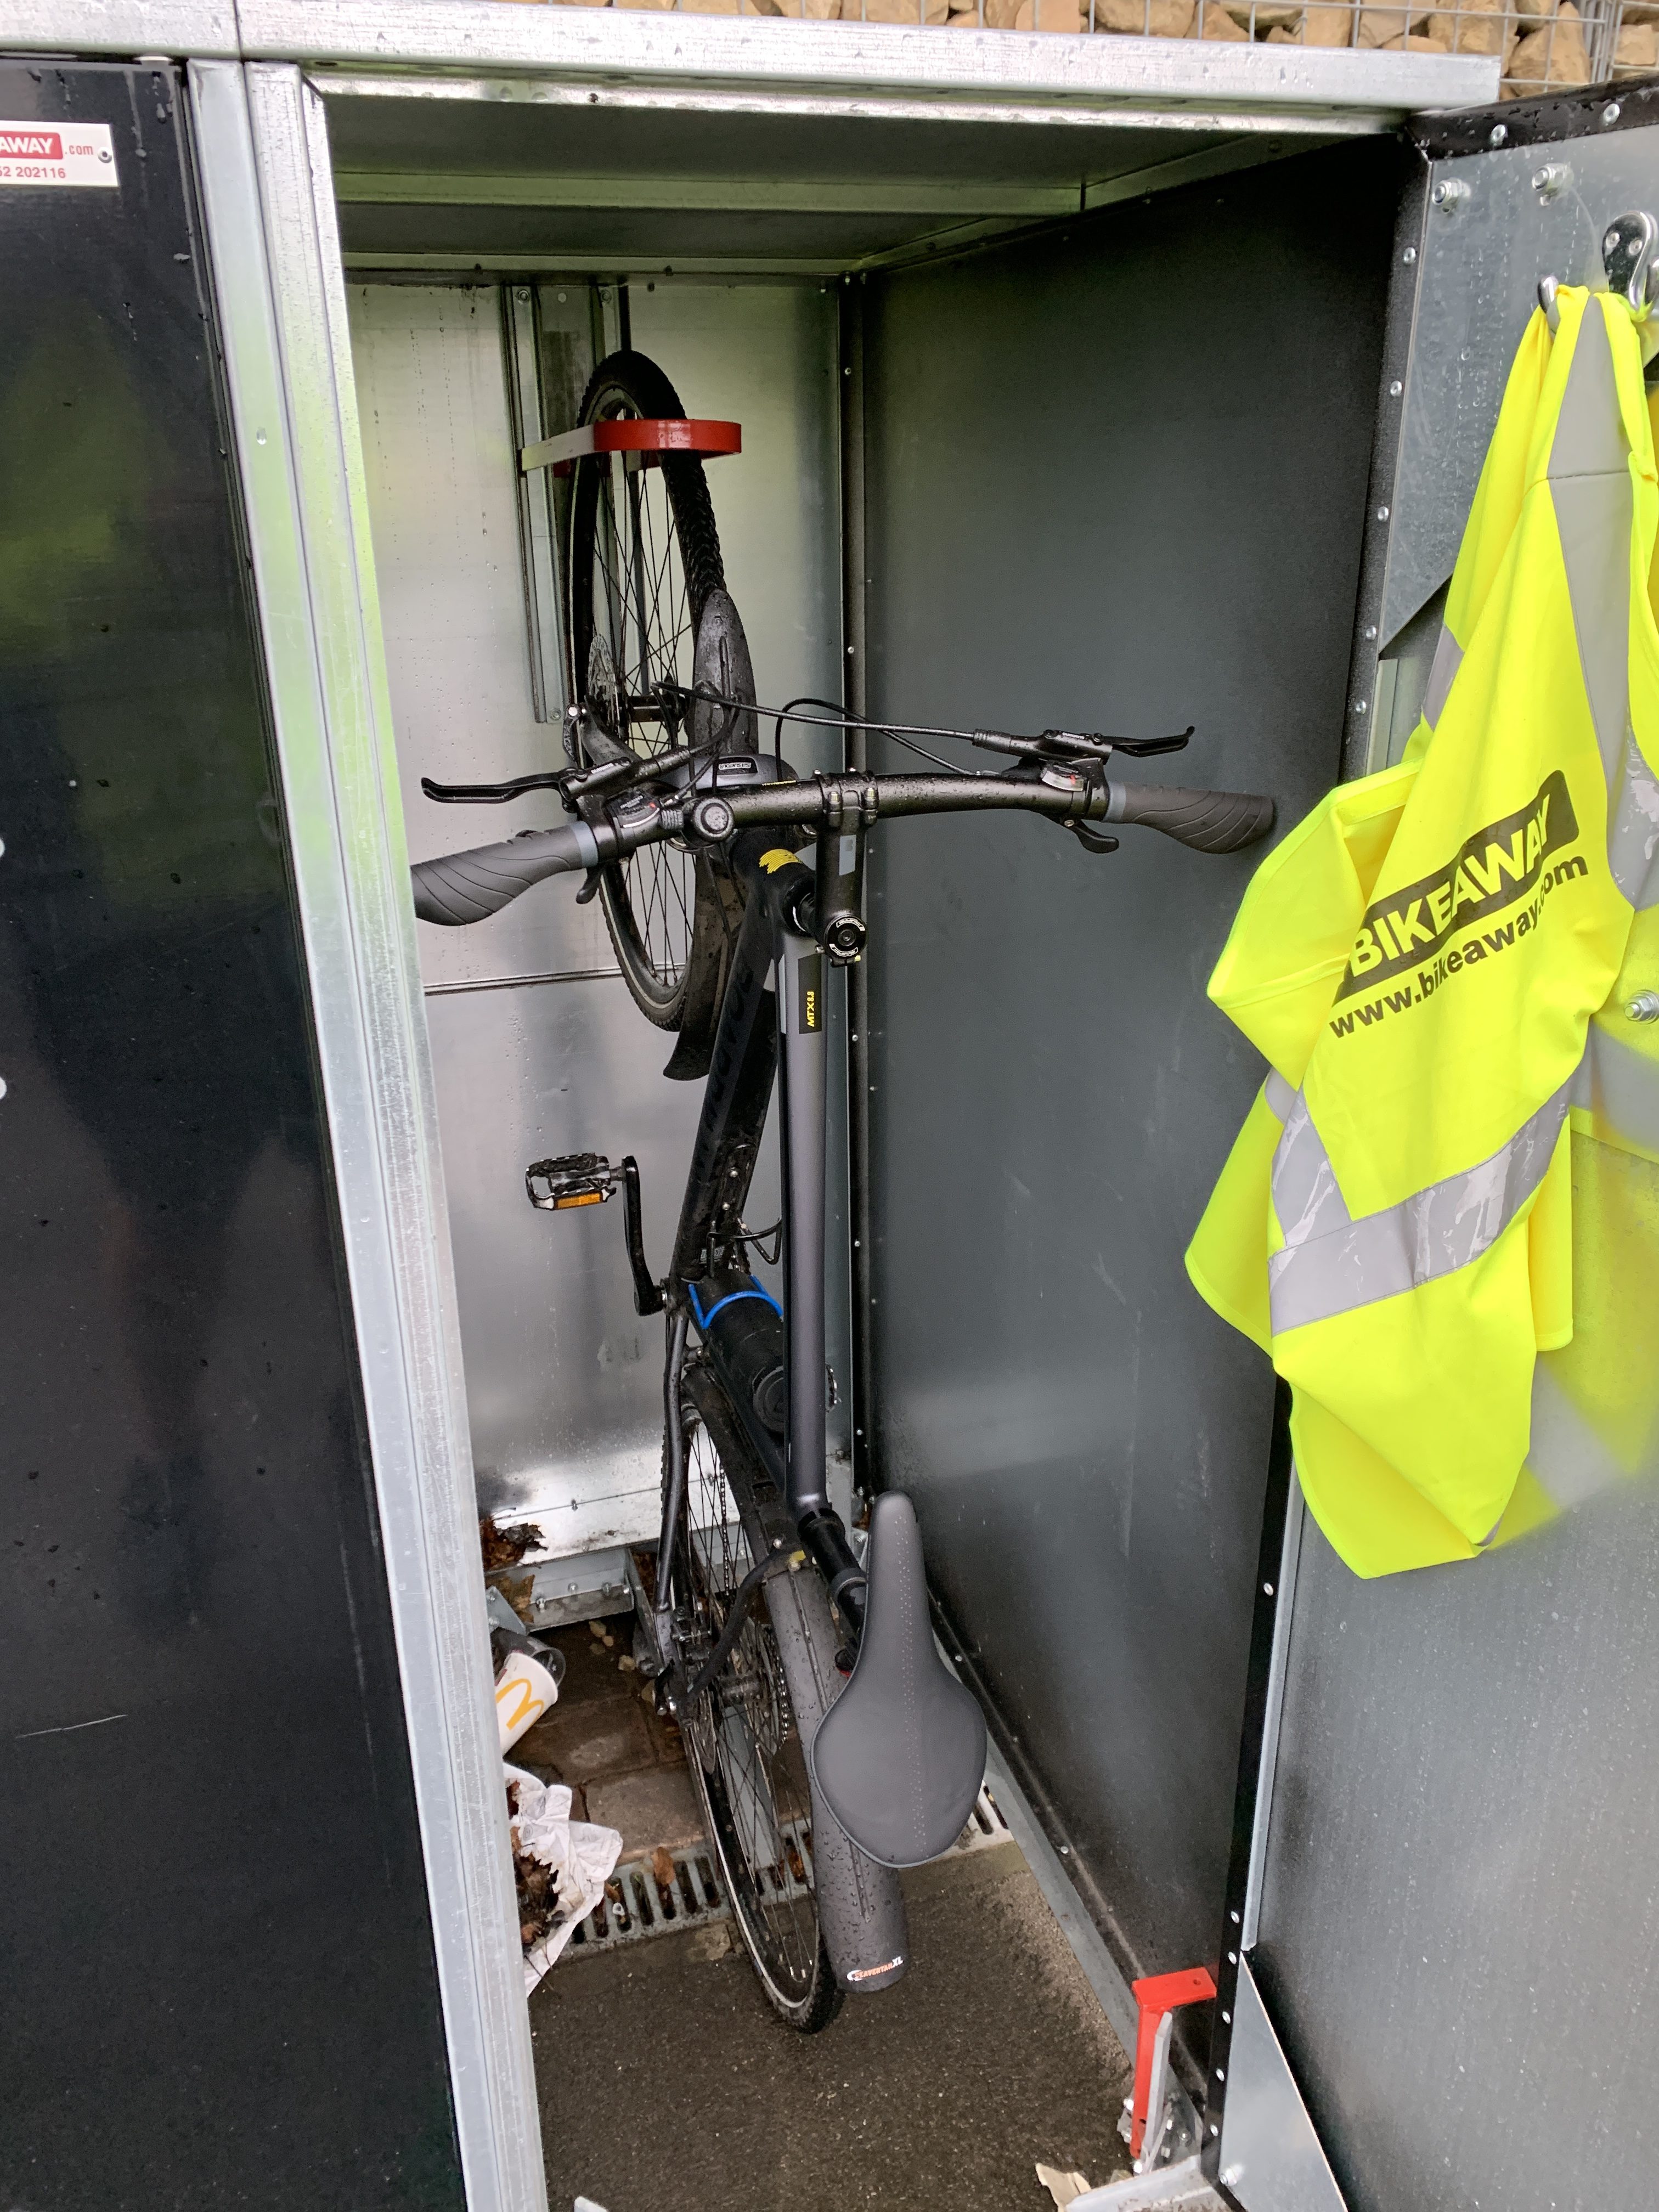 The DMC has excellent bike lockers so you can leave your bike securely locked away (and dry)